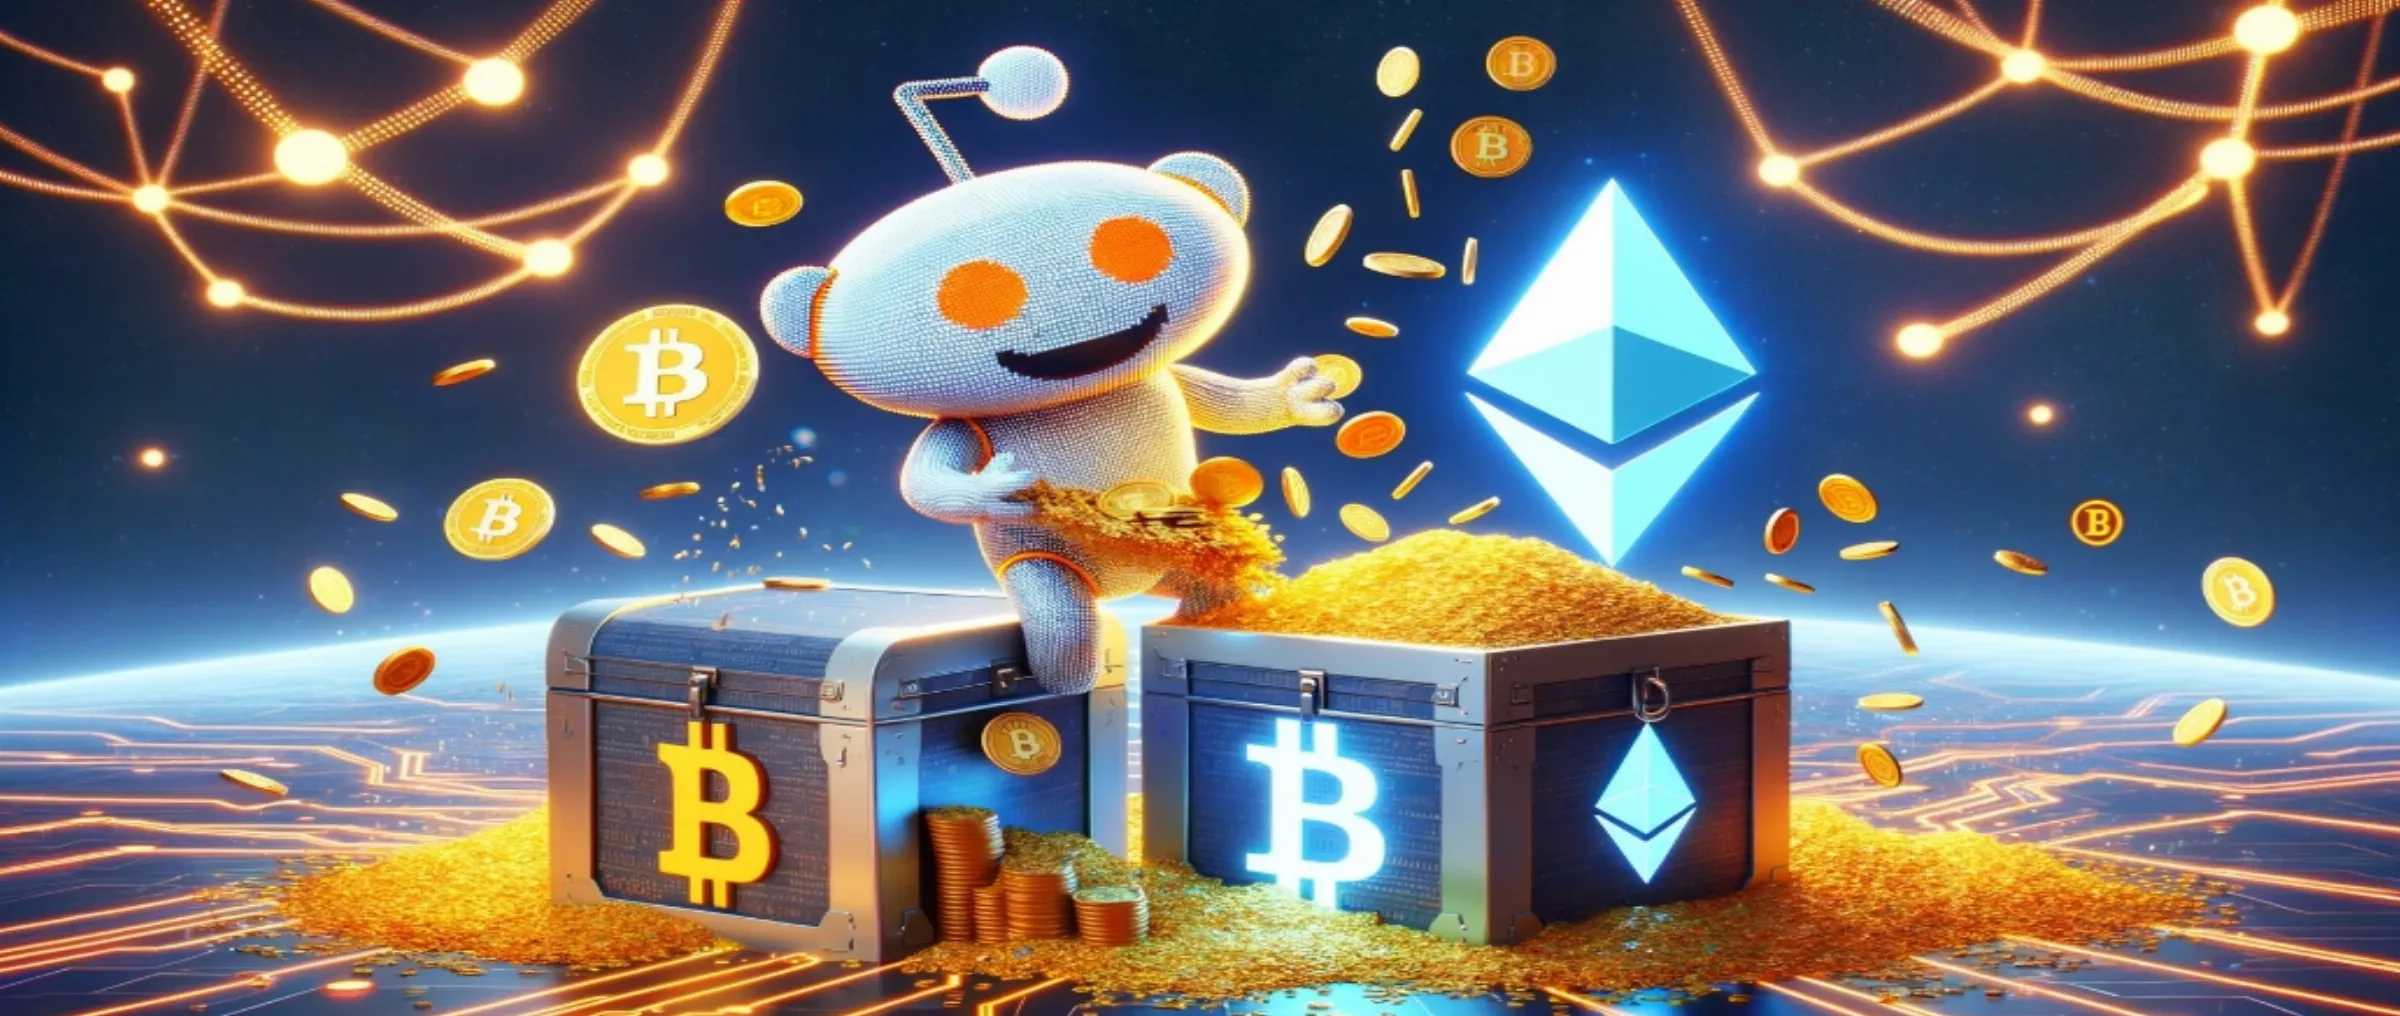 Reddit is channeling its surplus into investments in Bitcoin and Ethereum